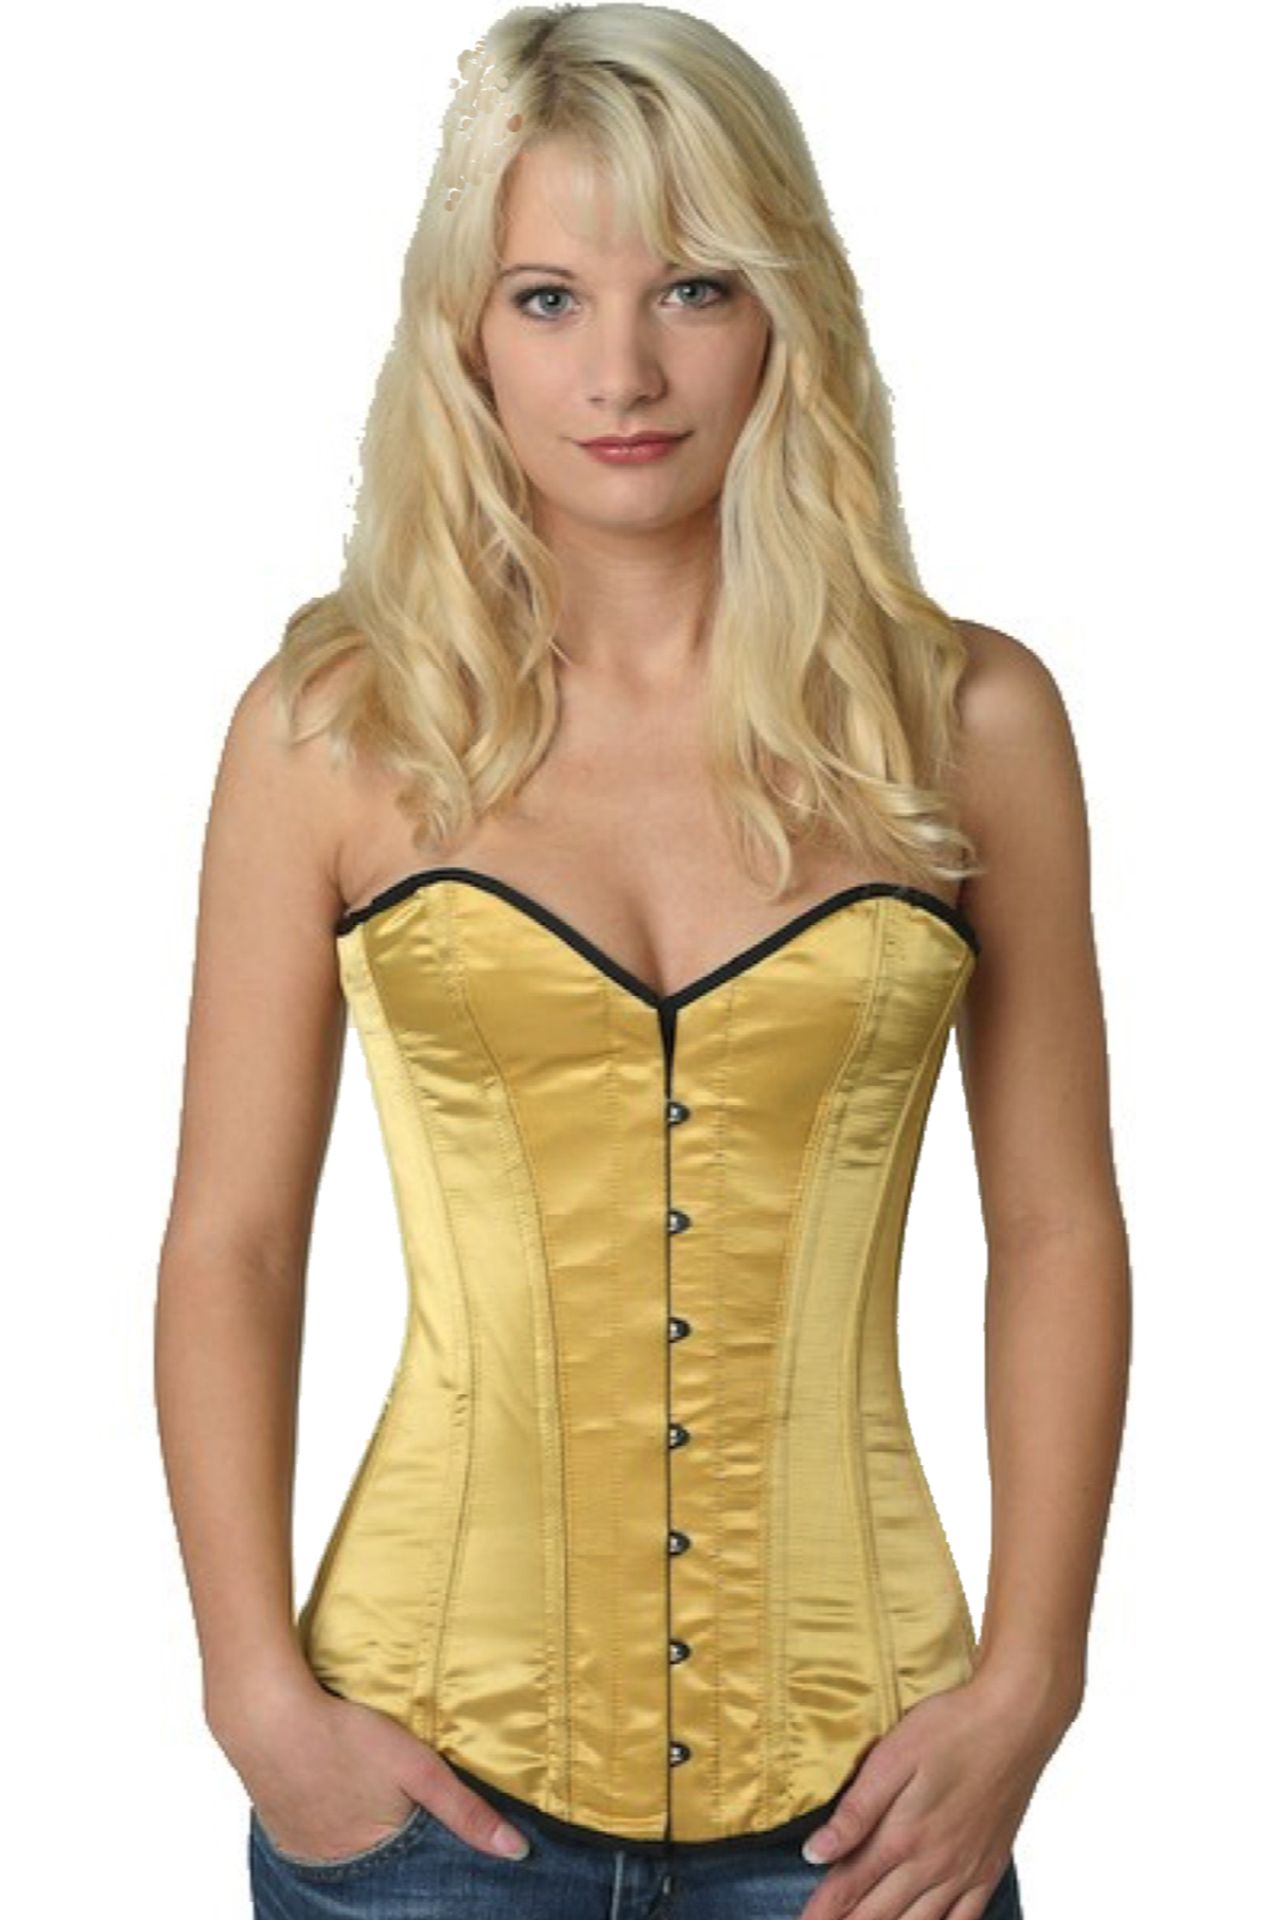 Corset gold satin overbust sy12